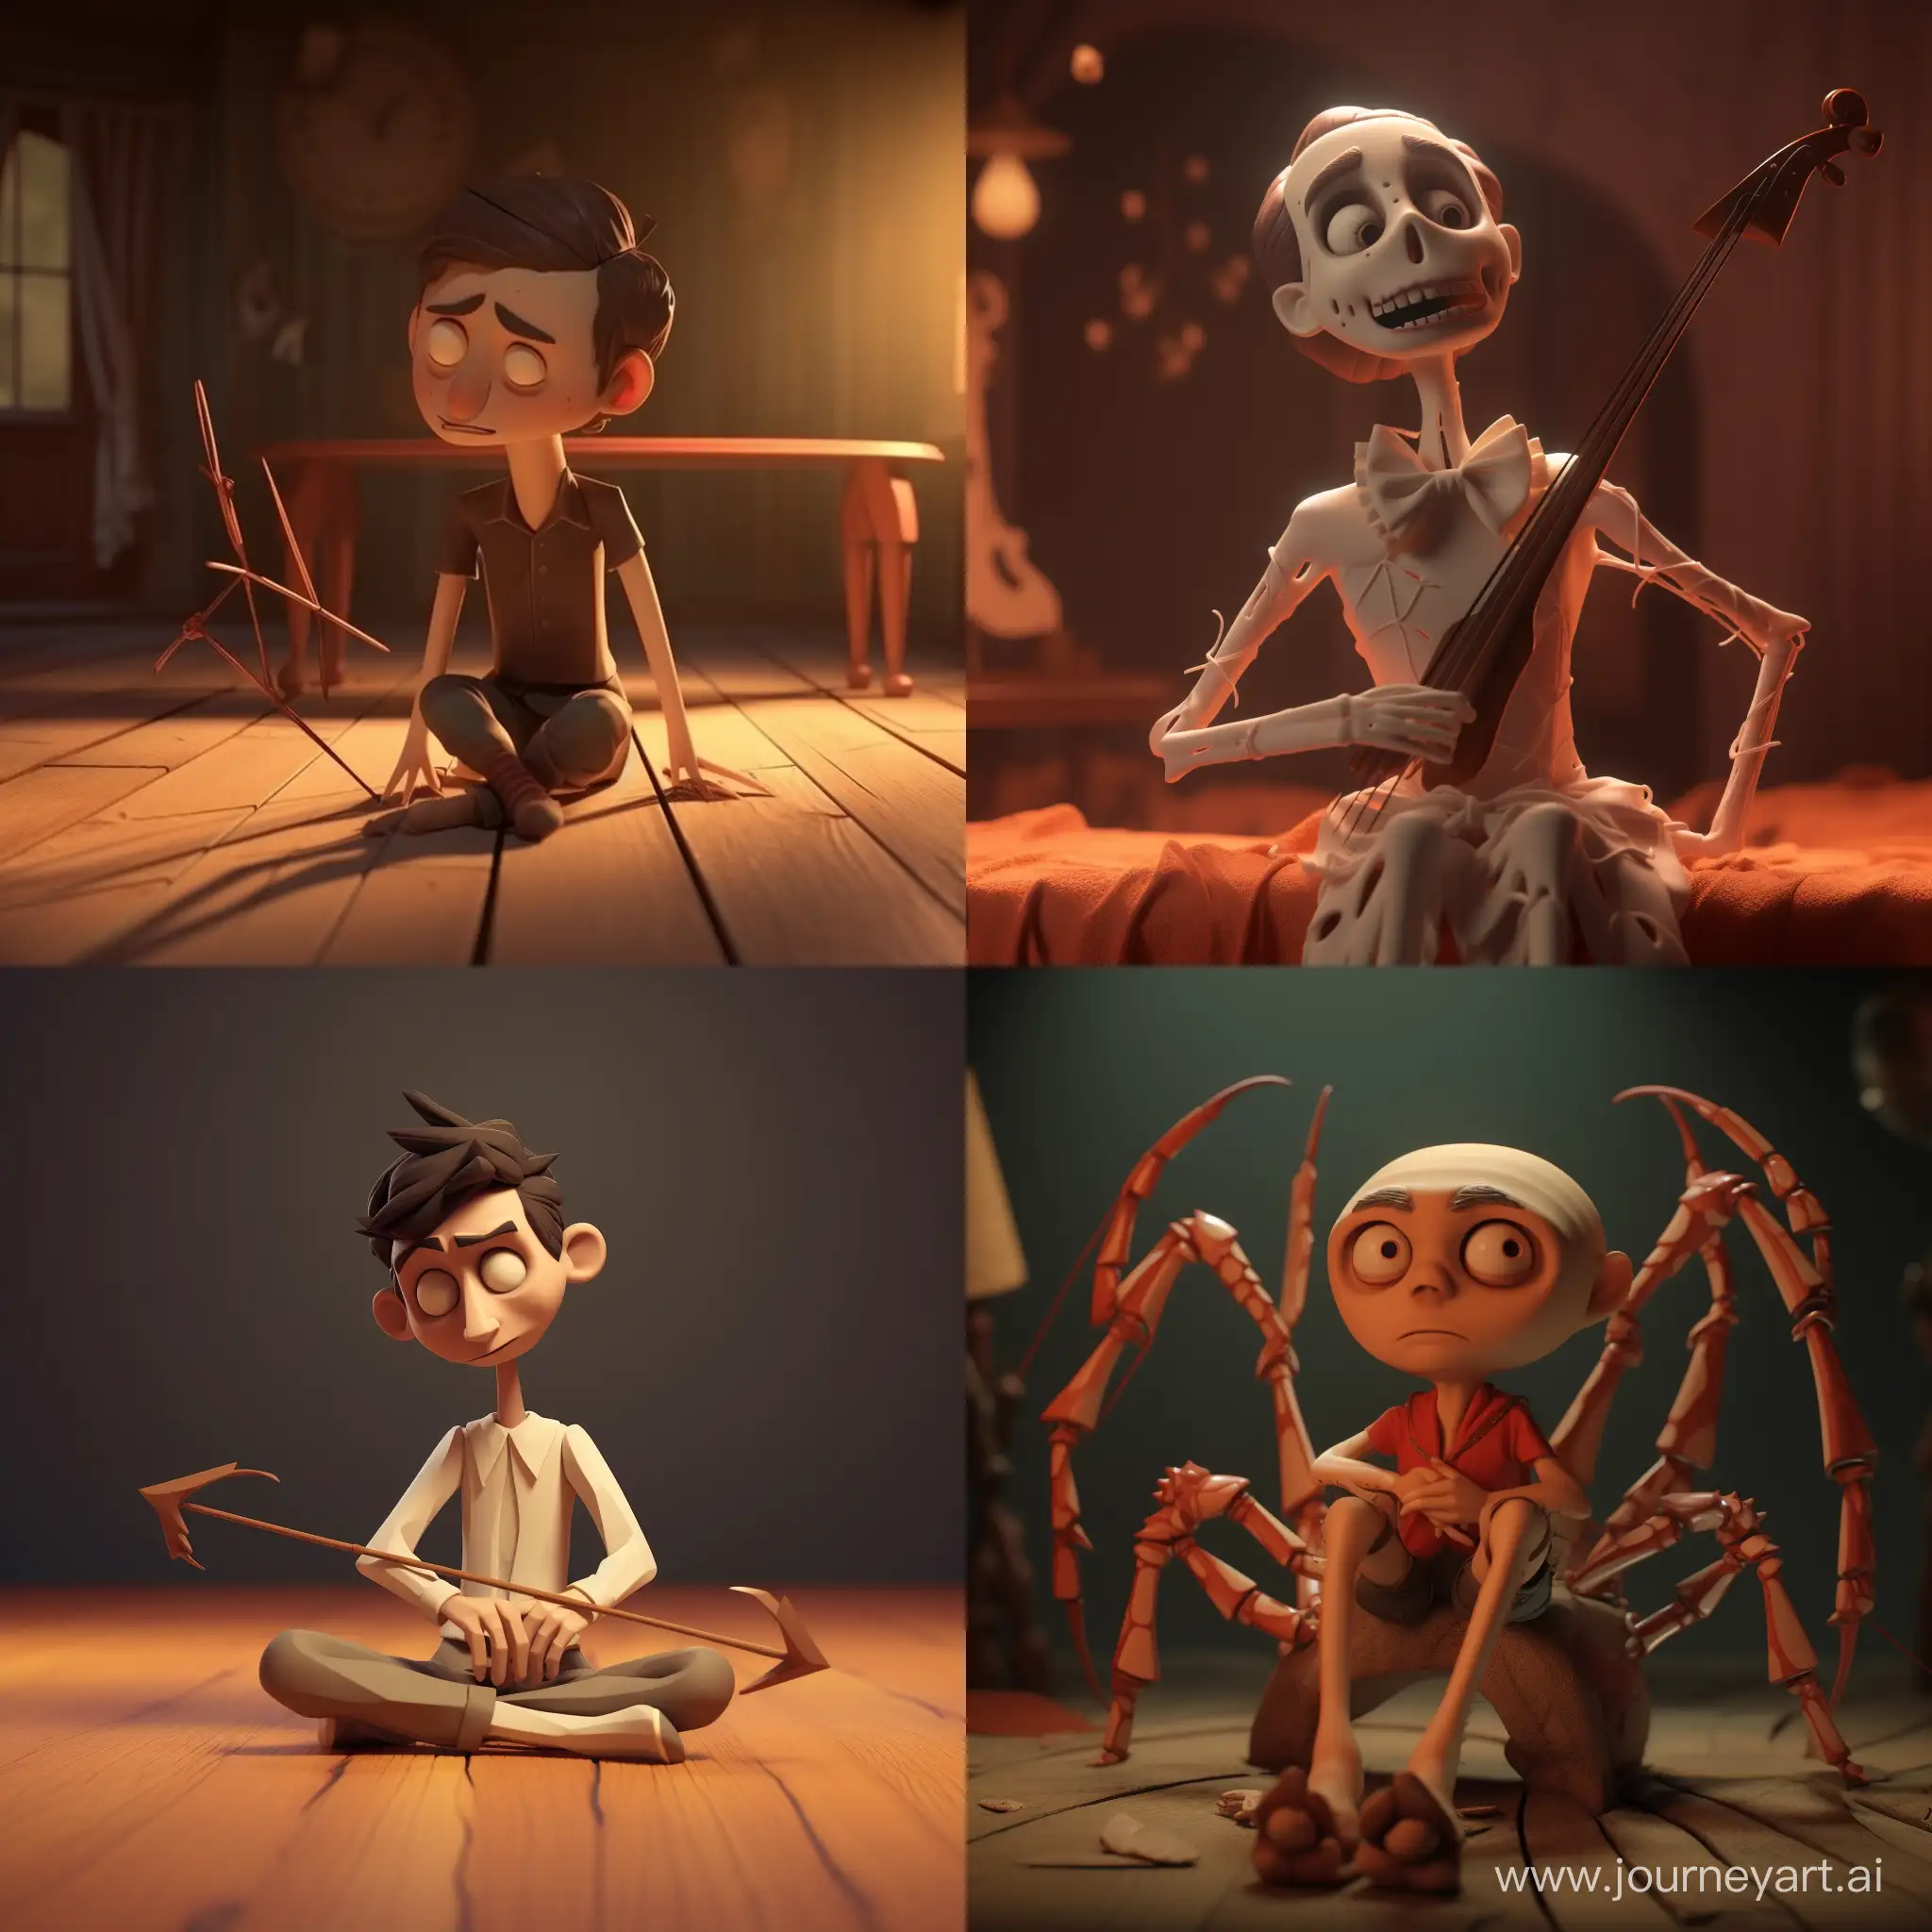 Expressive-3D-Animated-Bow-with-Arms-and-Legs-in-Emotional-Distress